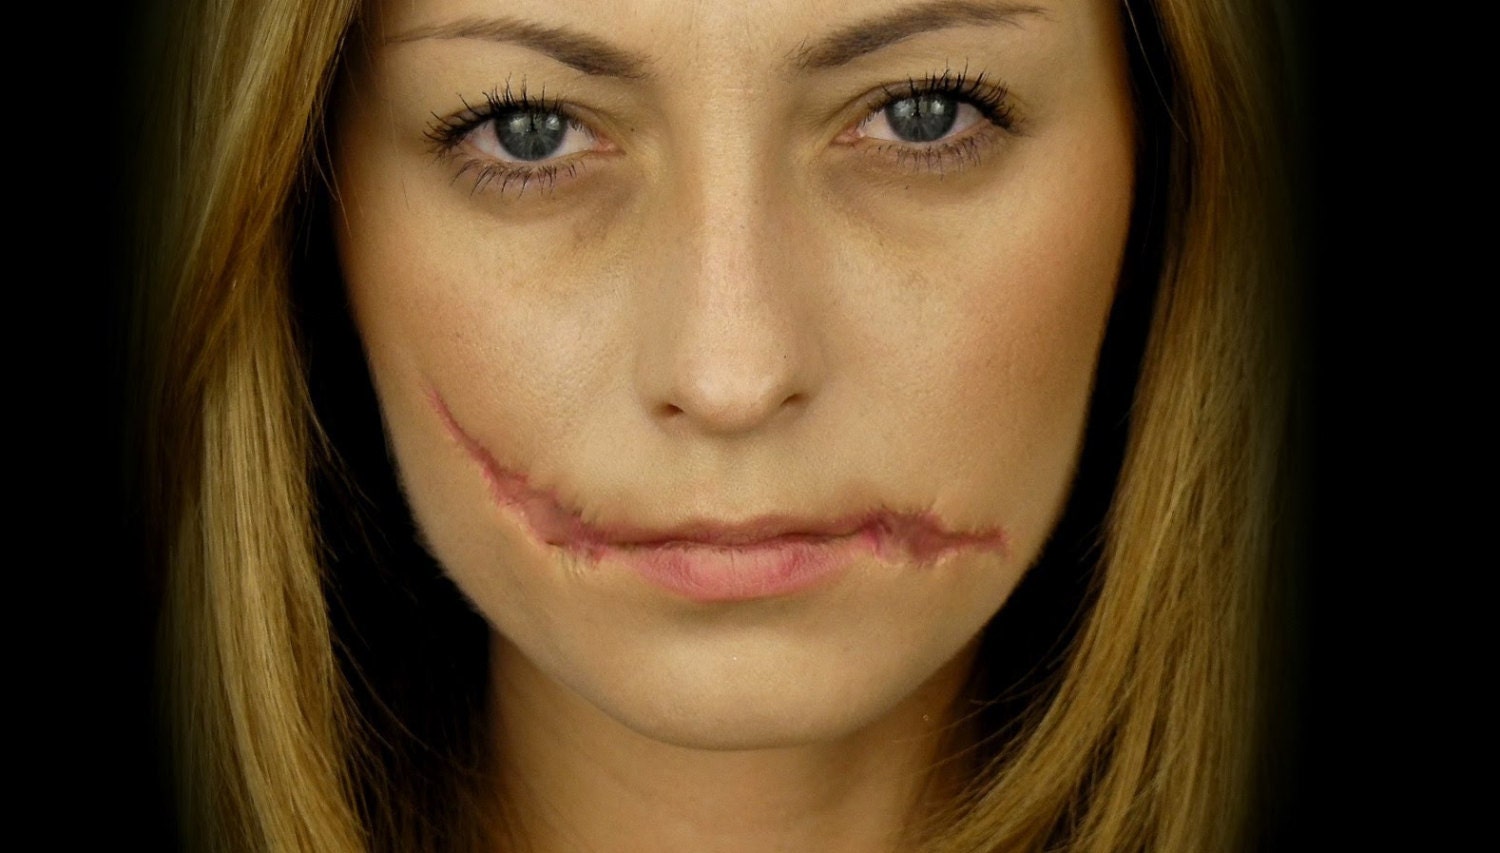 How To Make A Fake Scar On Your Face - Mehron, Inc.